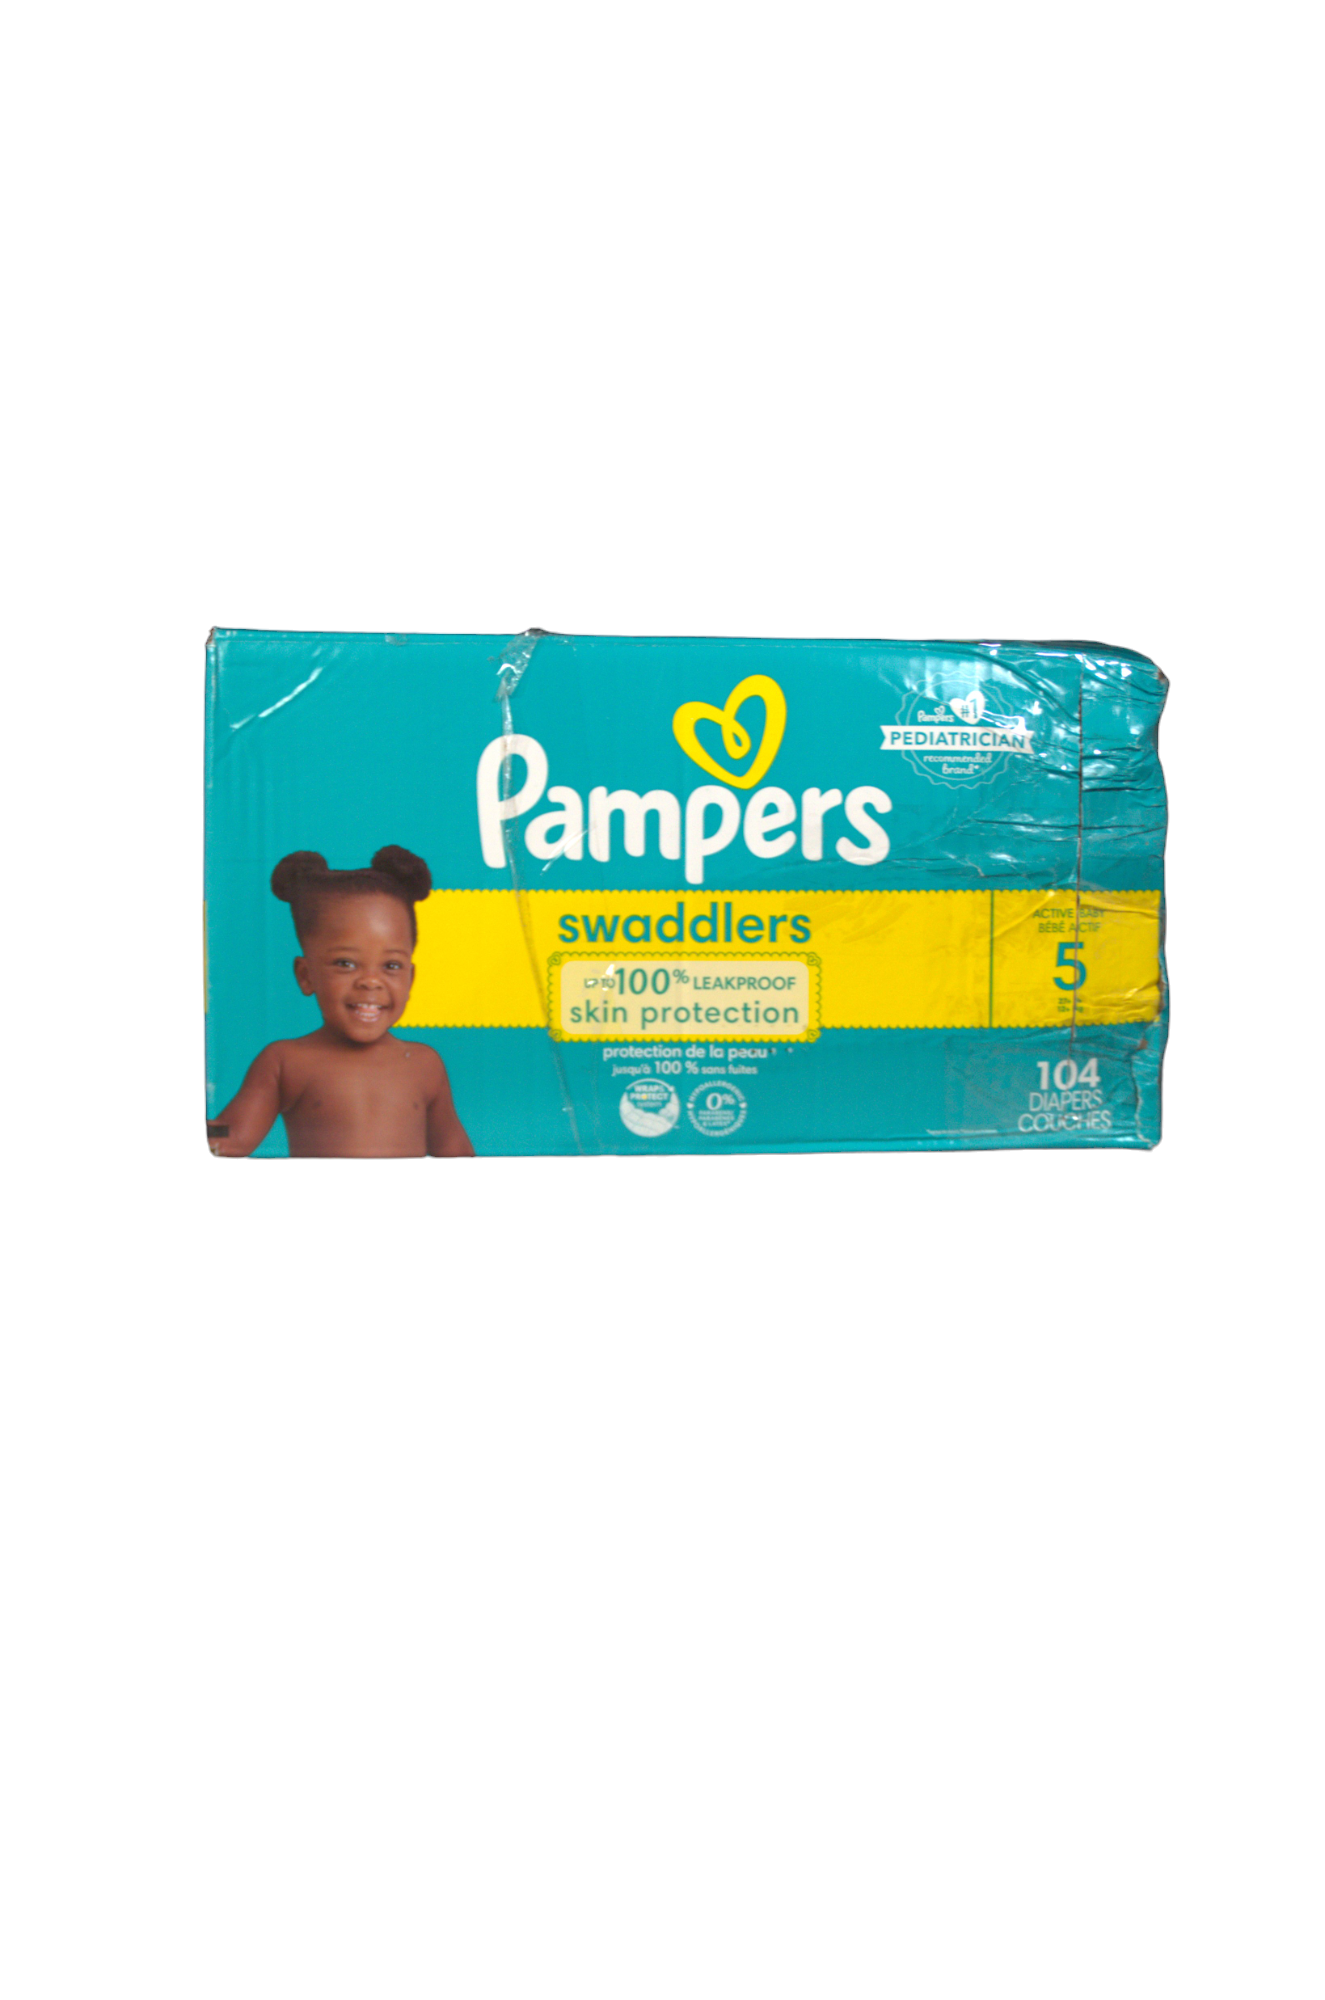 Pampers Swaddlers - Size 5 - 104 Count - 5 - Like New